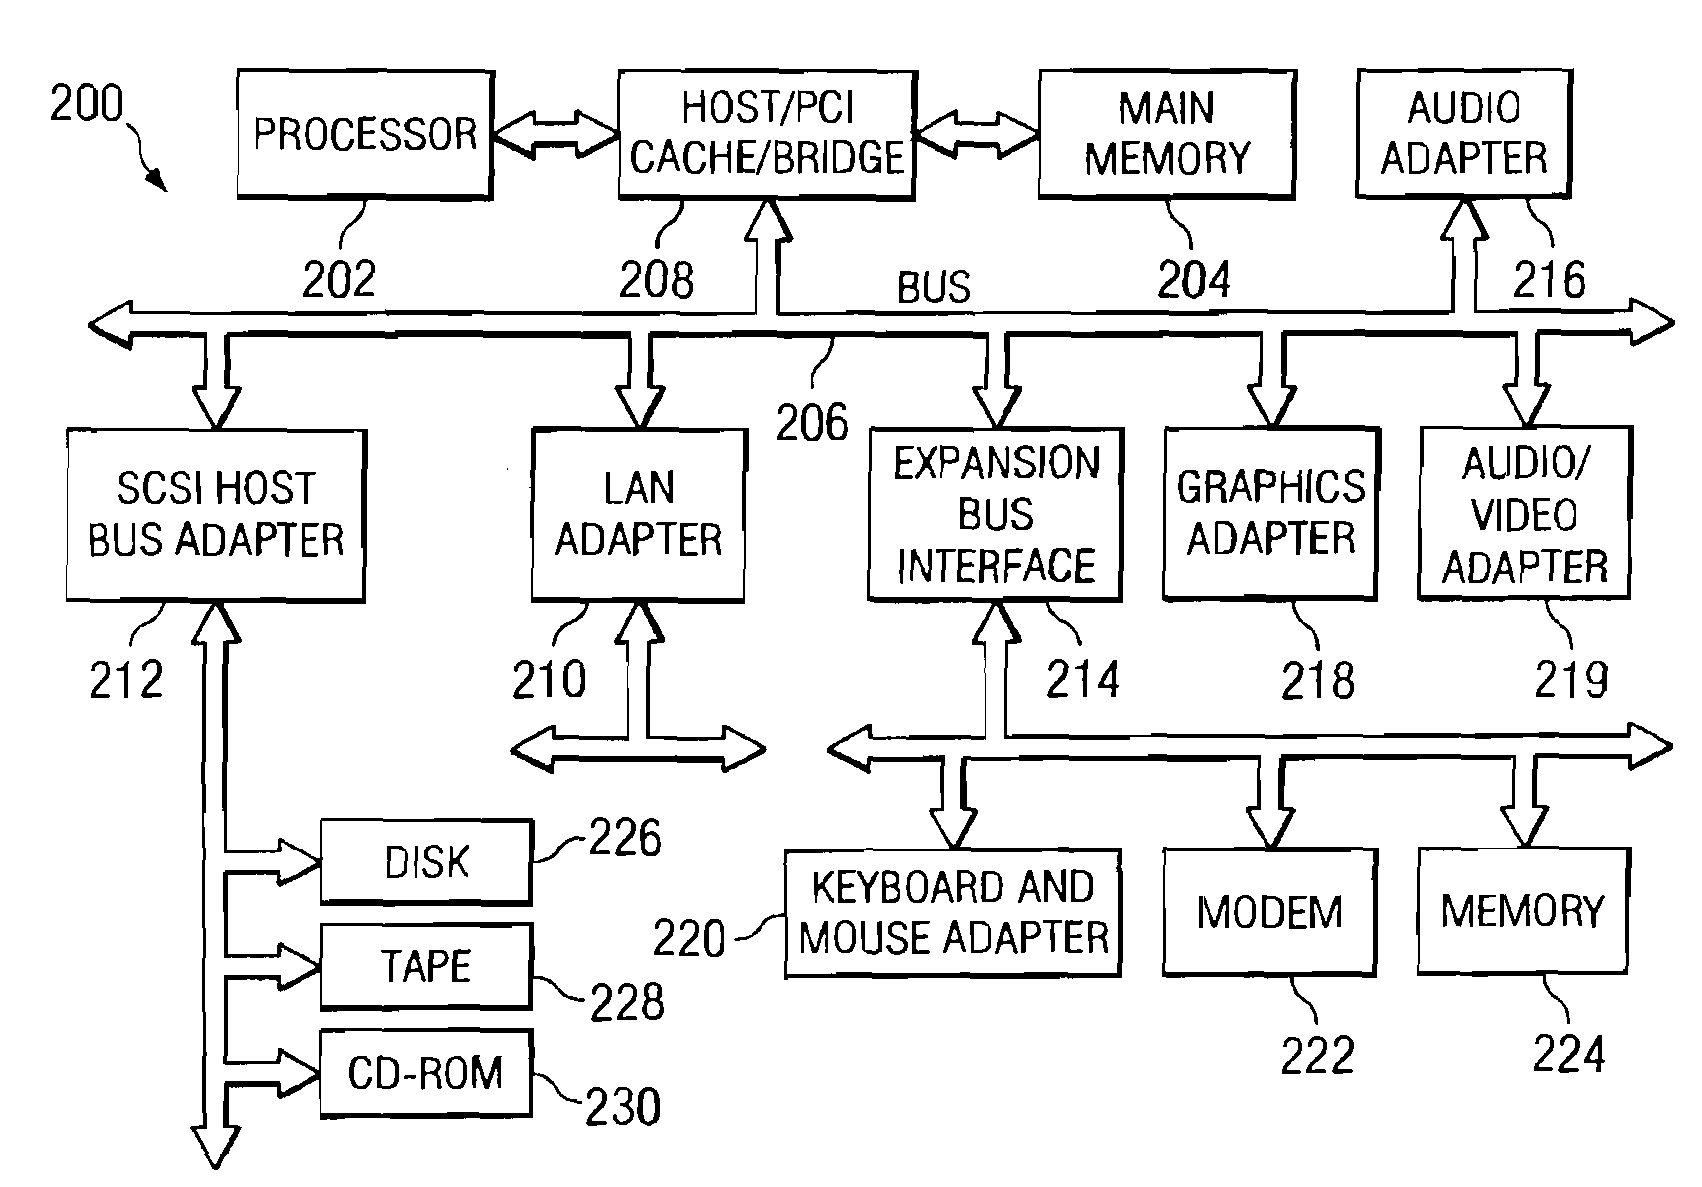 Method and apparatus for dynamically tuning radio stations with user-defined play lists